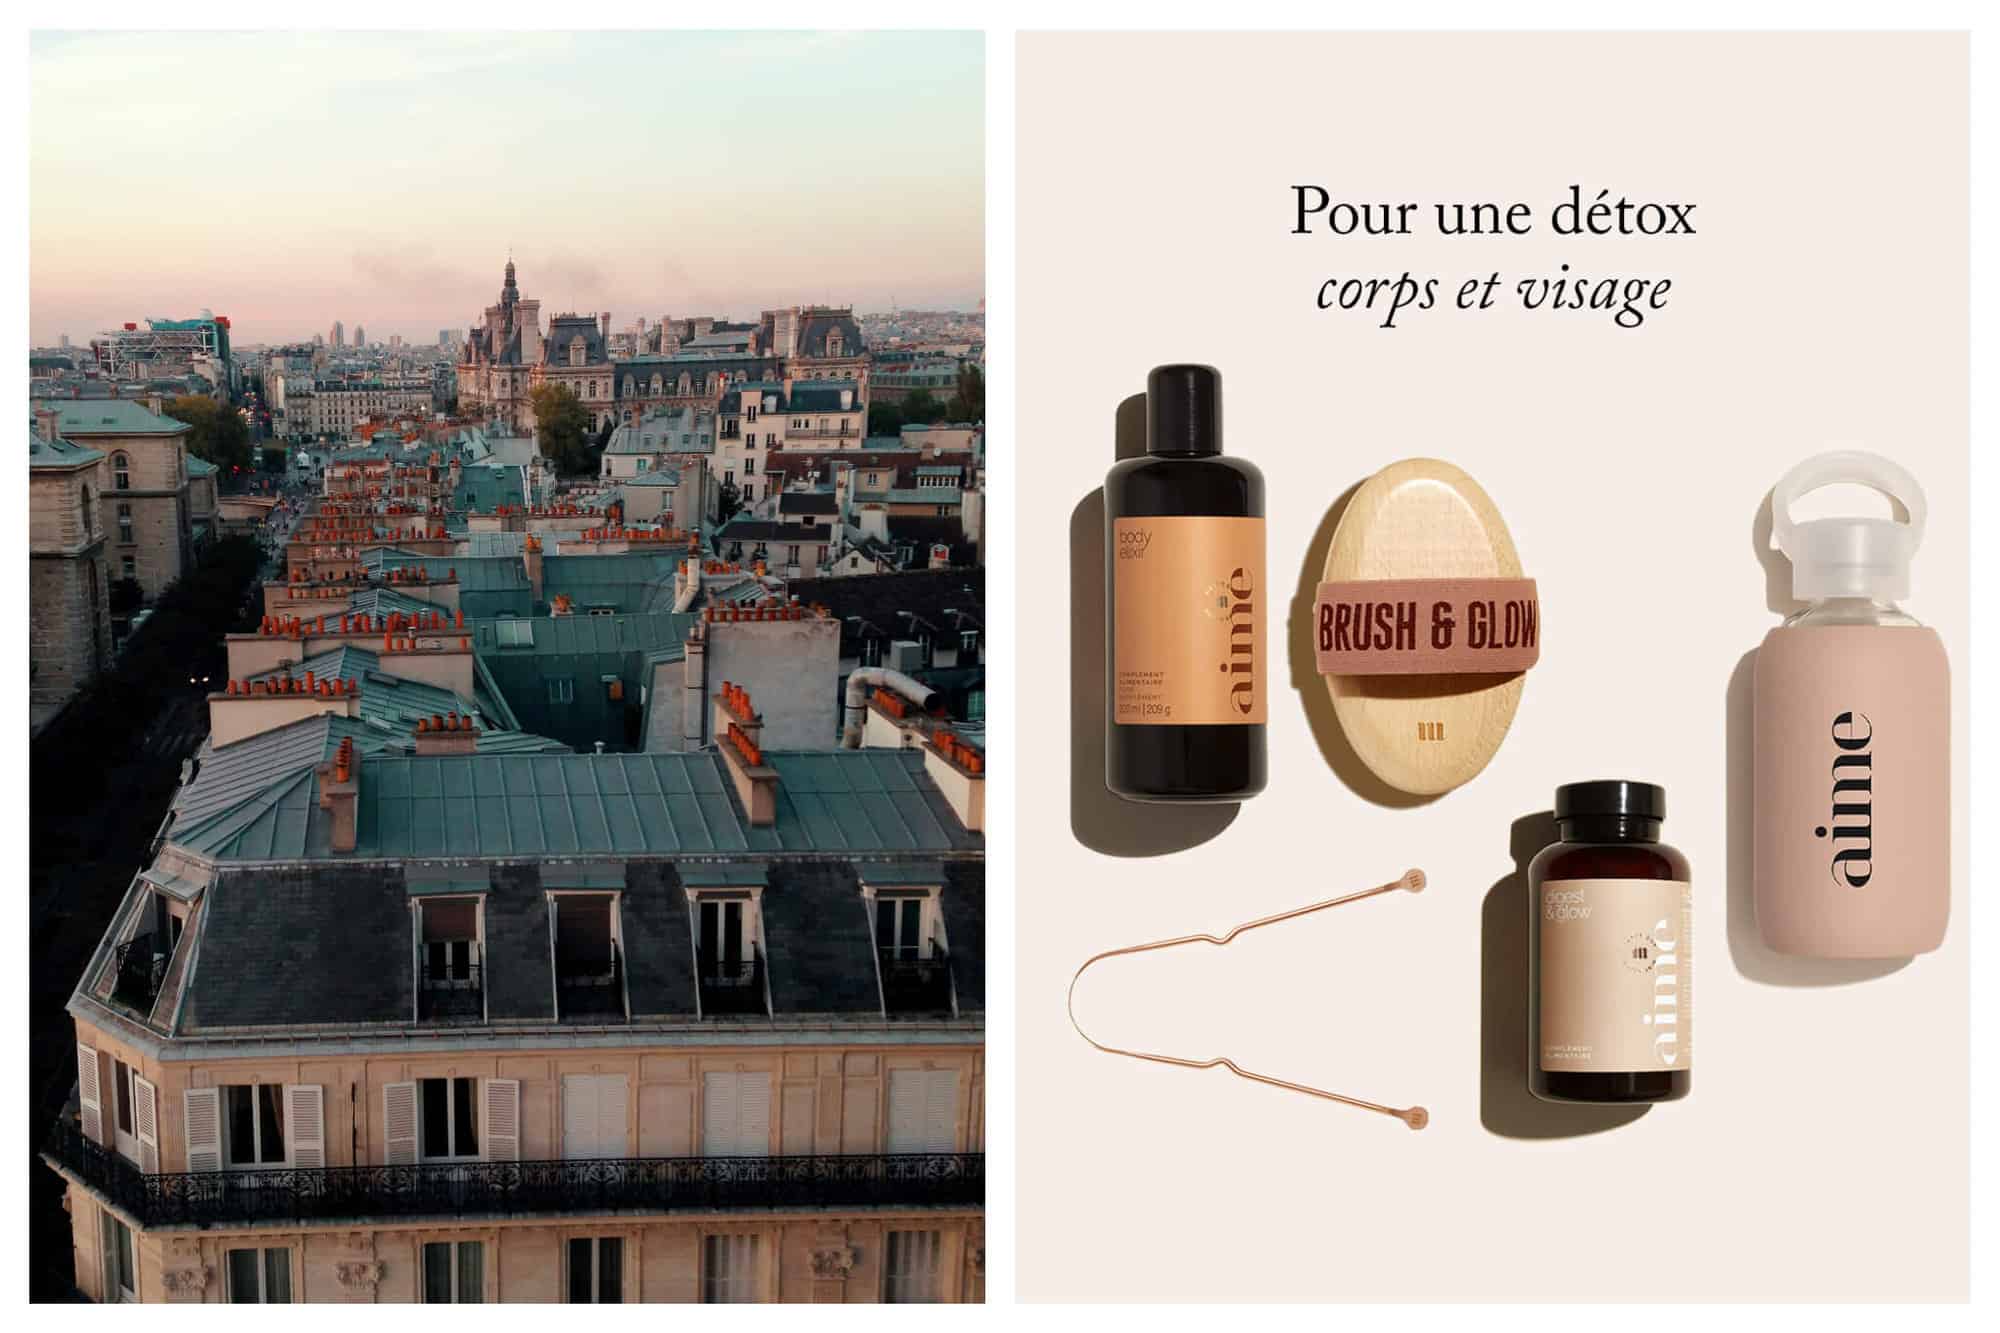 Left: a view of Parisian rooftops at dusk, with Hotel de Ville in the background. Right: the words 'Pour une détox corps et visage' above various products by AIME.